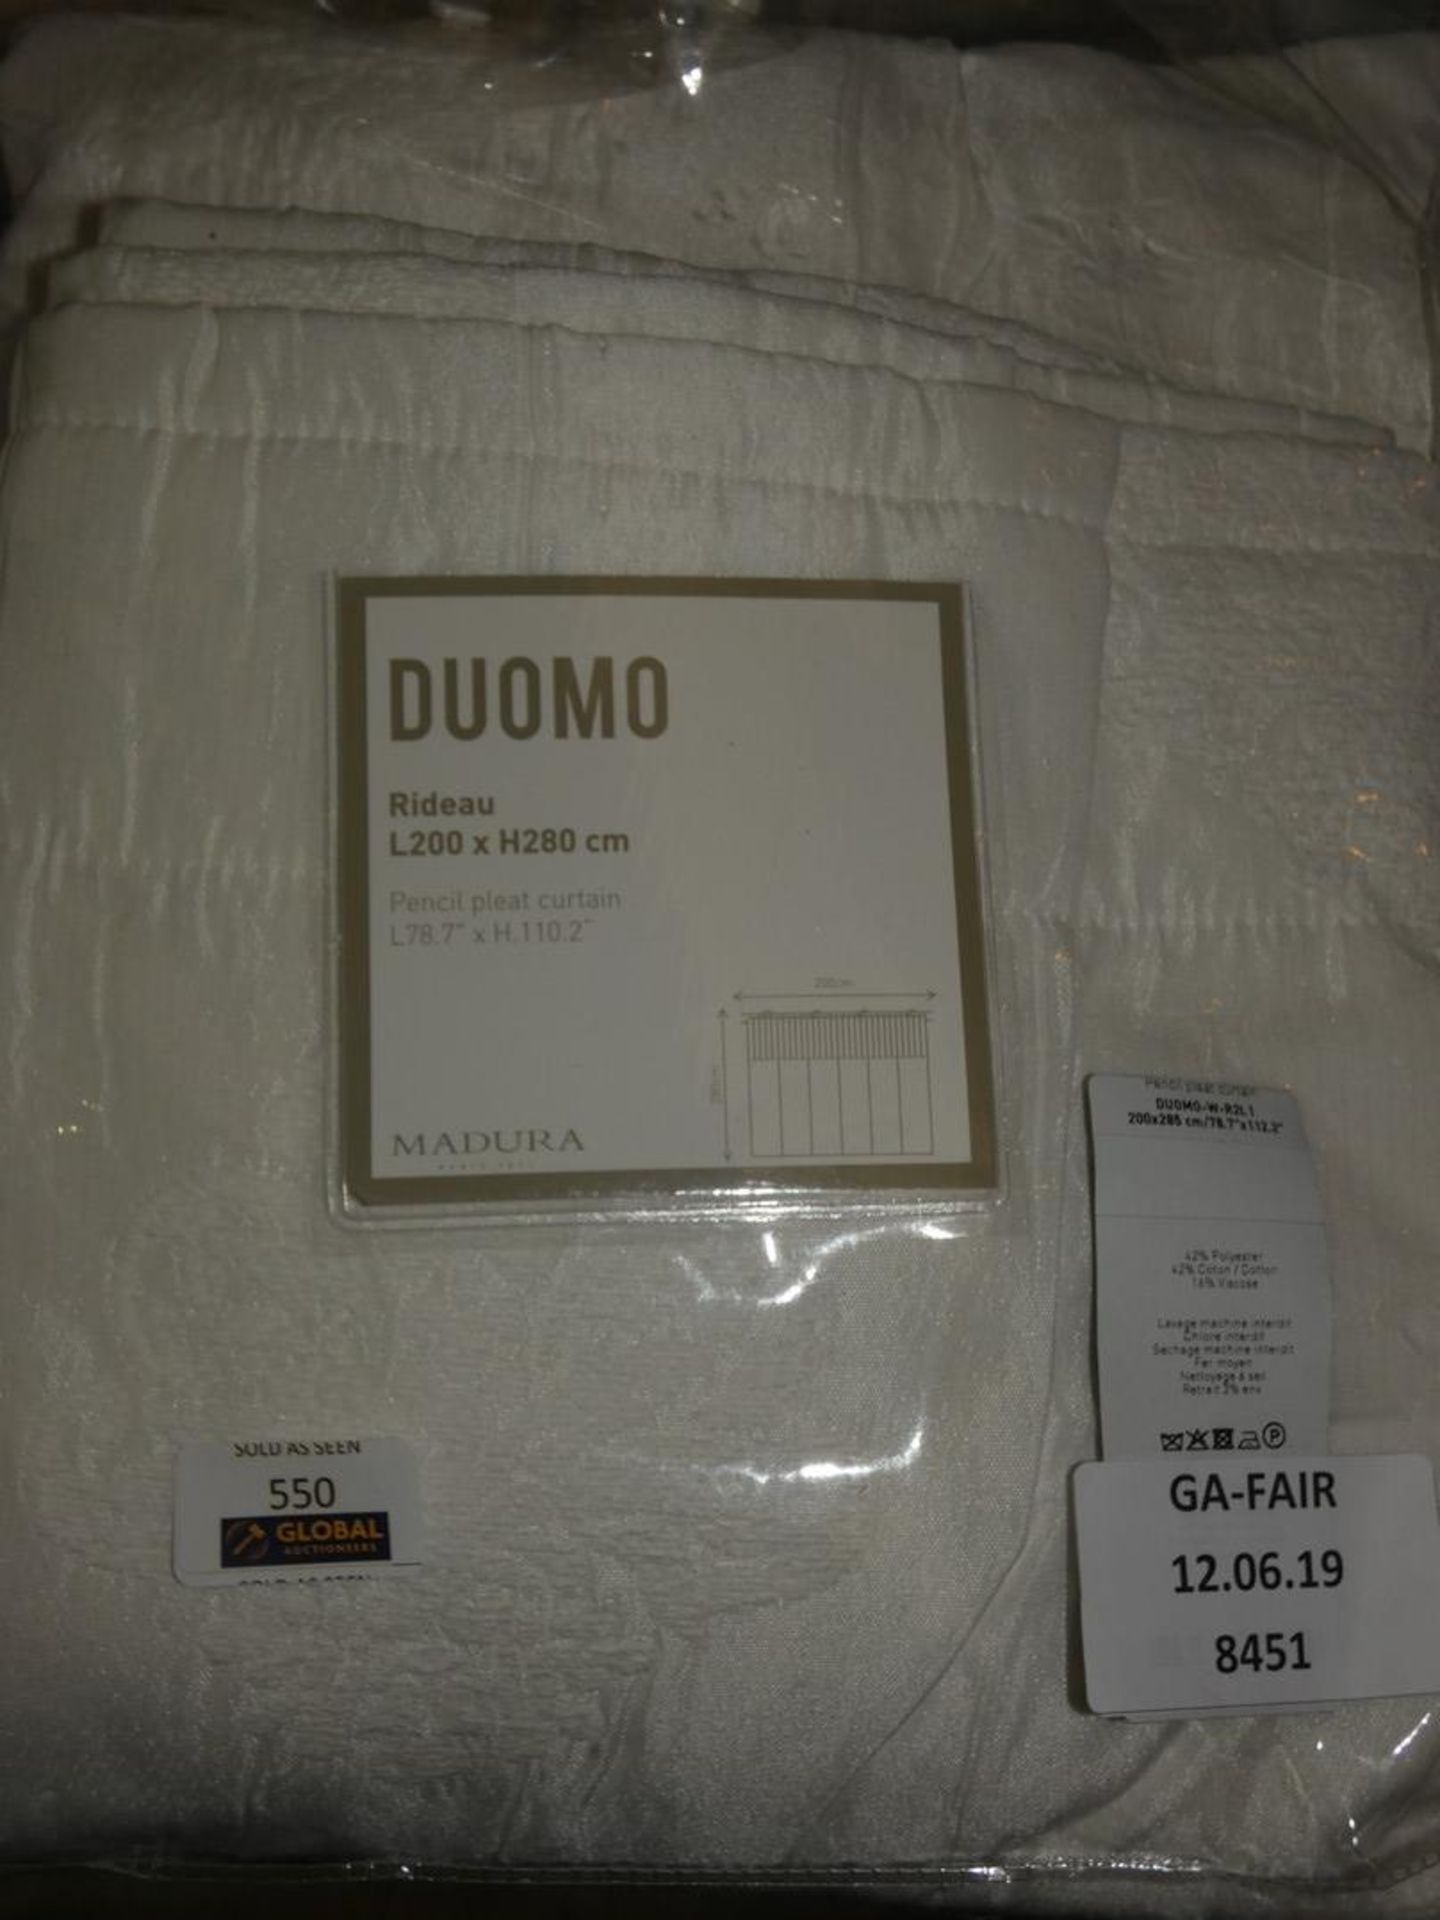 Bagged Pair Of Dumo Radau 200x280cm Curtains RRP £50 (Viewings And Appraisals Are Highly